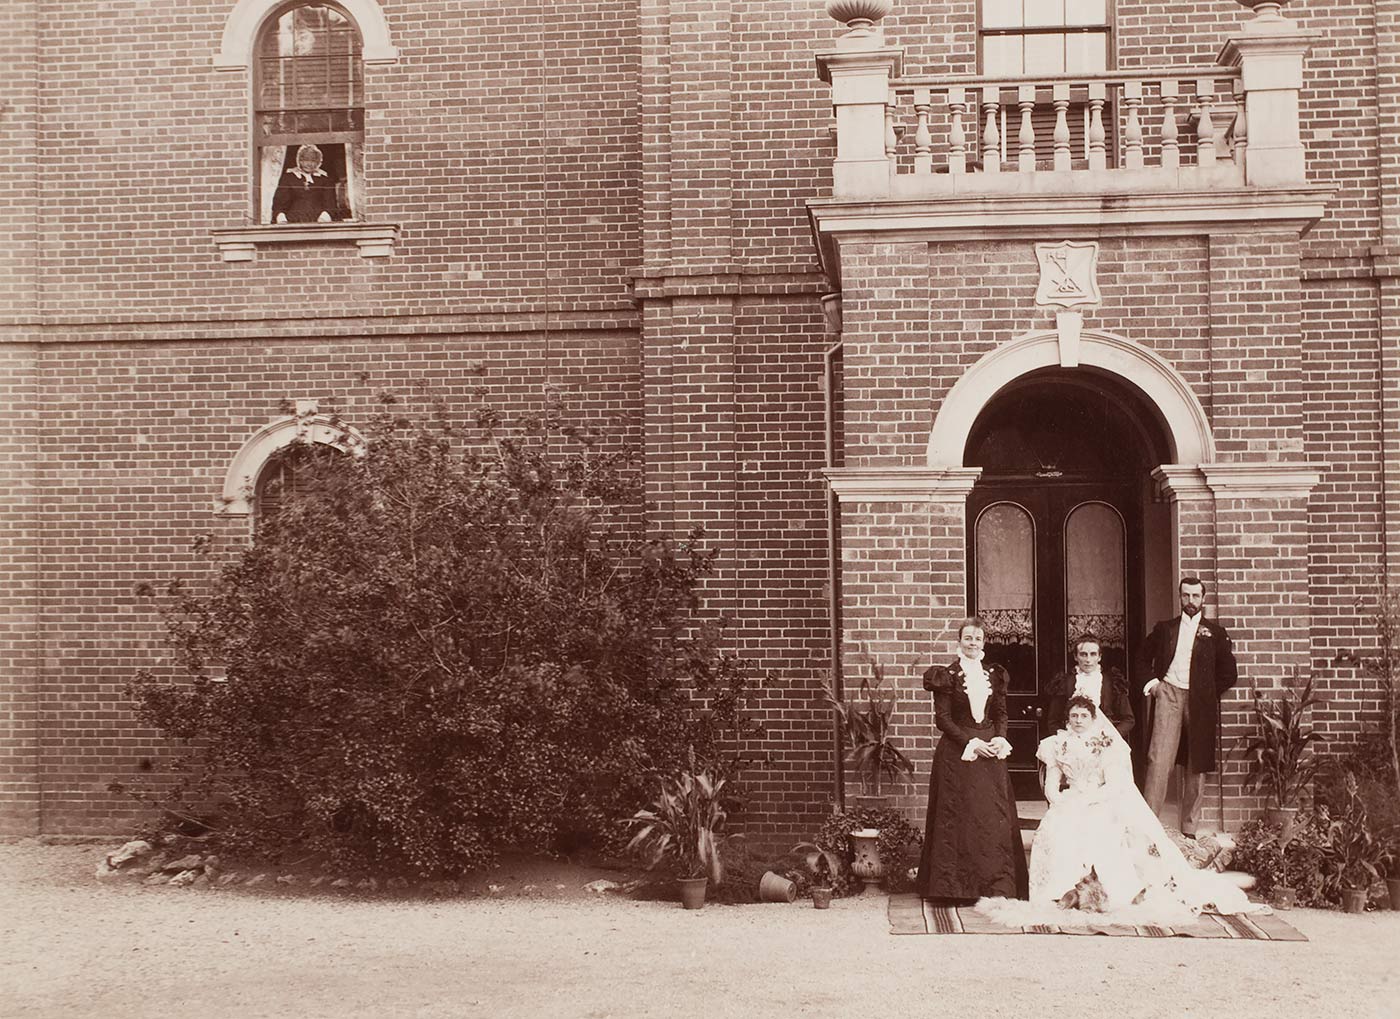 A black and white photograph that shows a wedding party standing below an arched entrance way in front of a section of a brick building. There is a bush to one side and a figure looking out of a window in the upper left section of the photograph. - click to view larger image